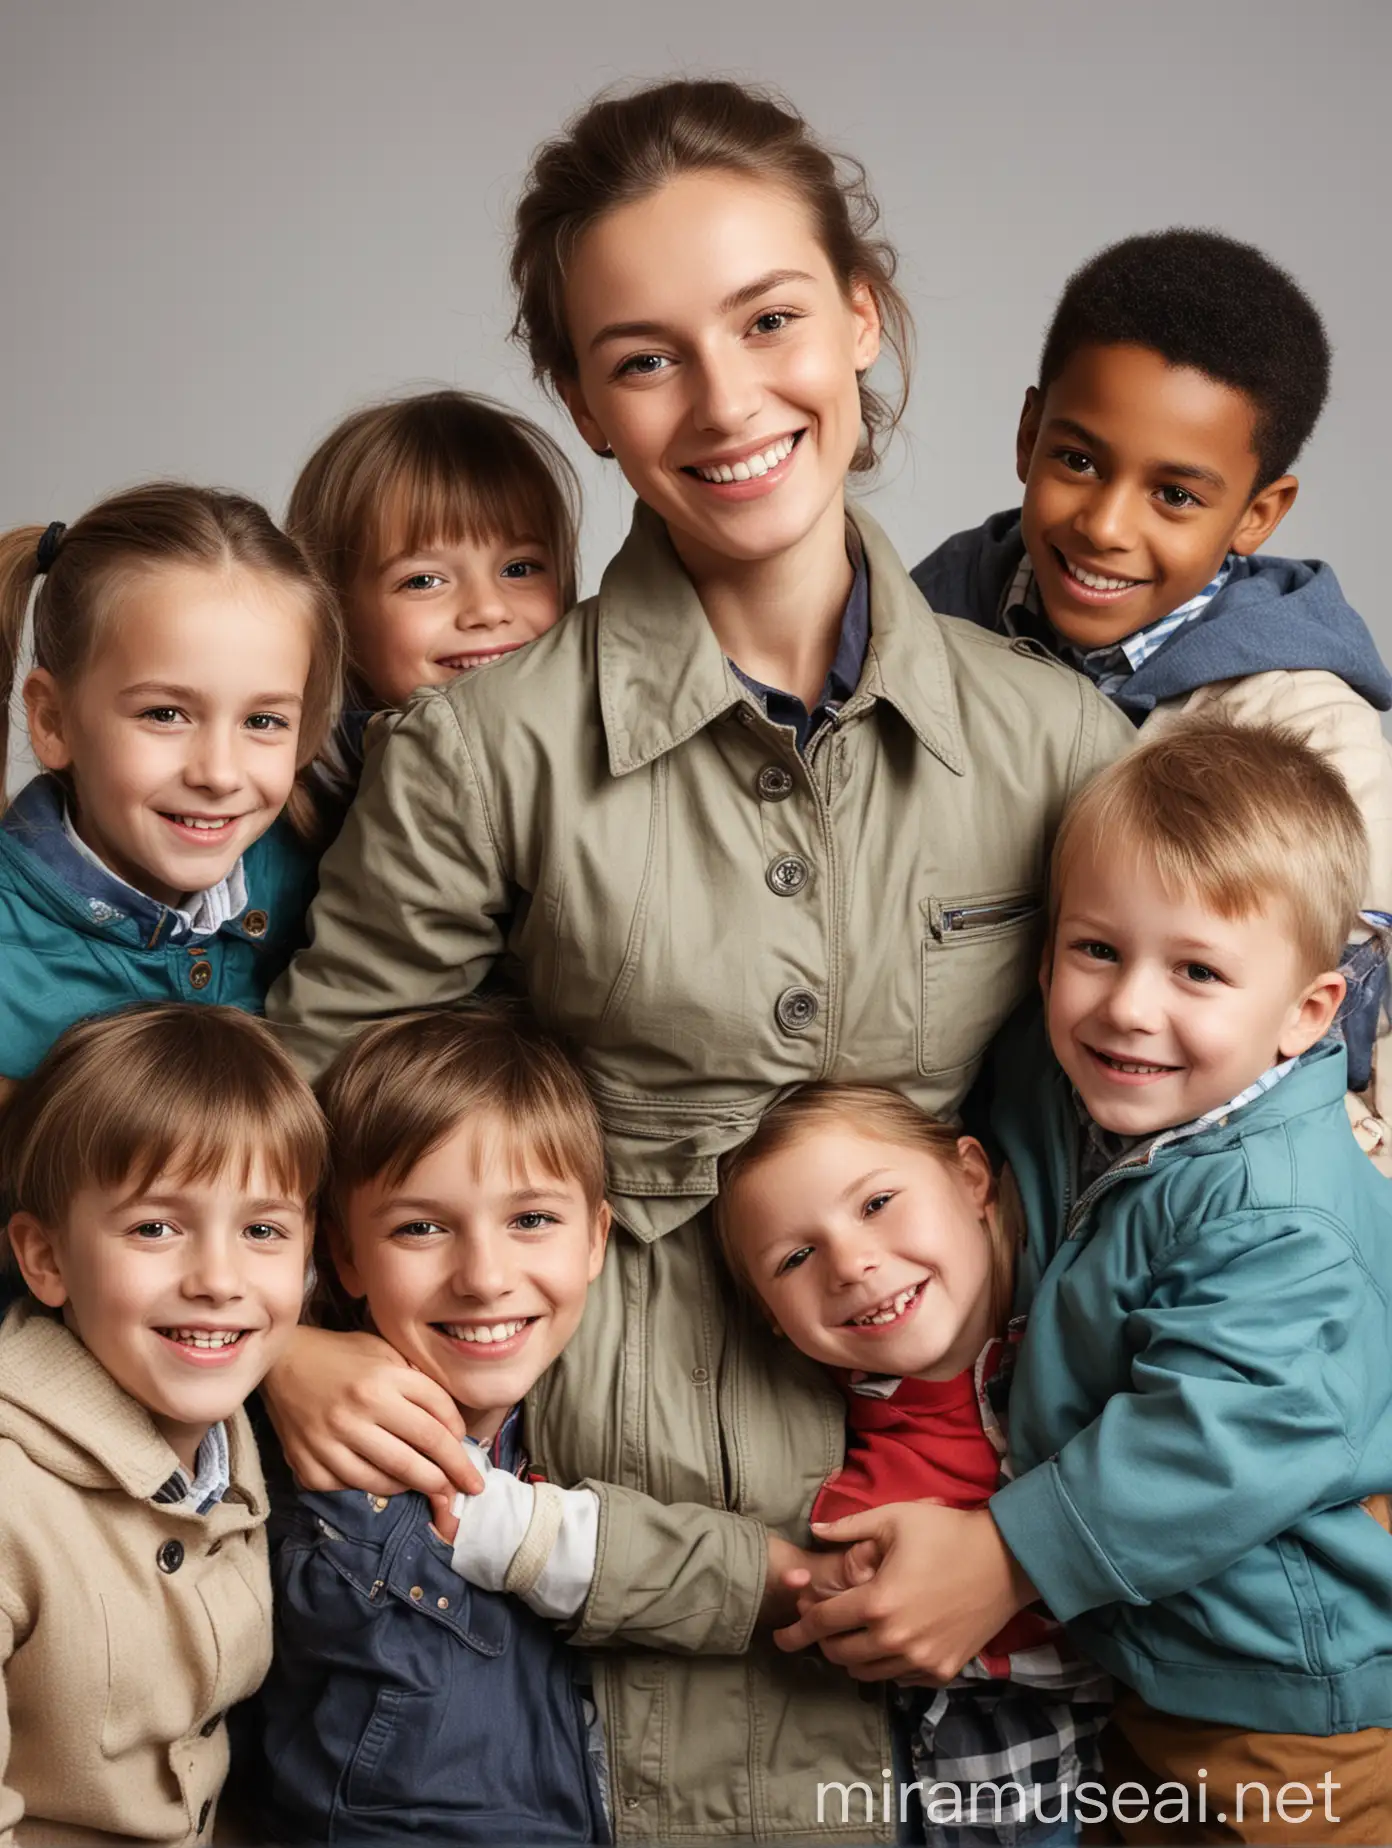 Smiling Young Teacher Embracing Group of Happy Children in School Setting